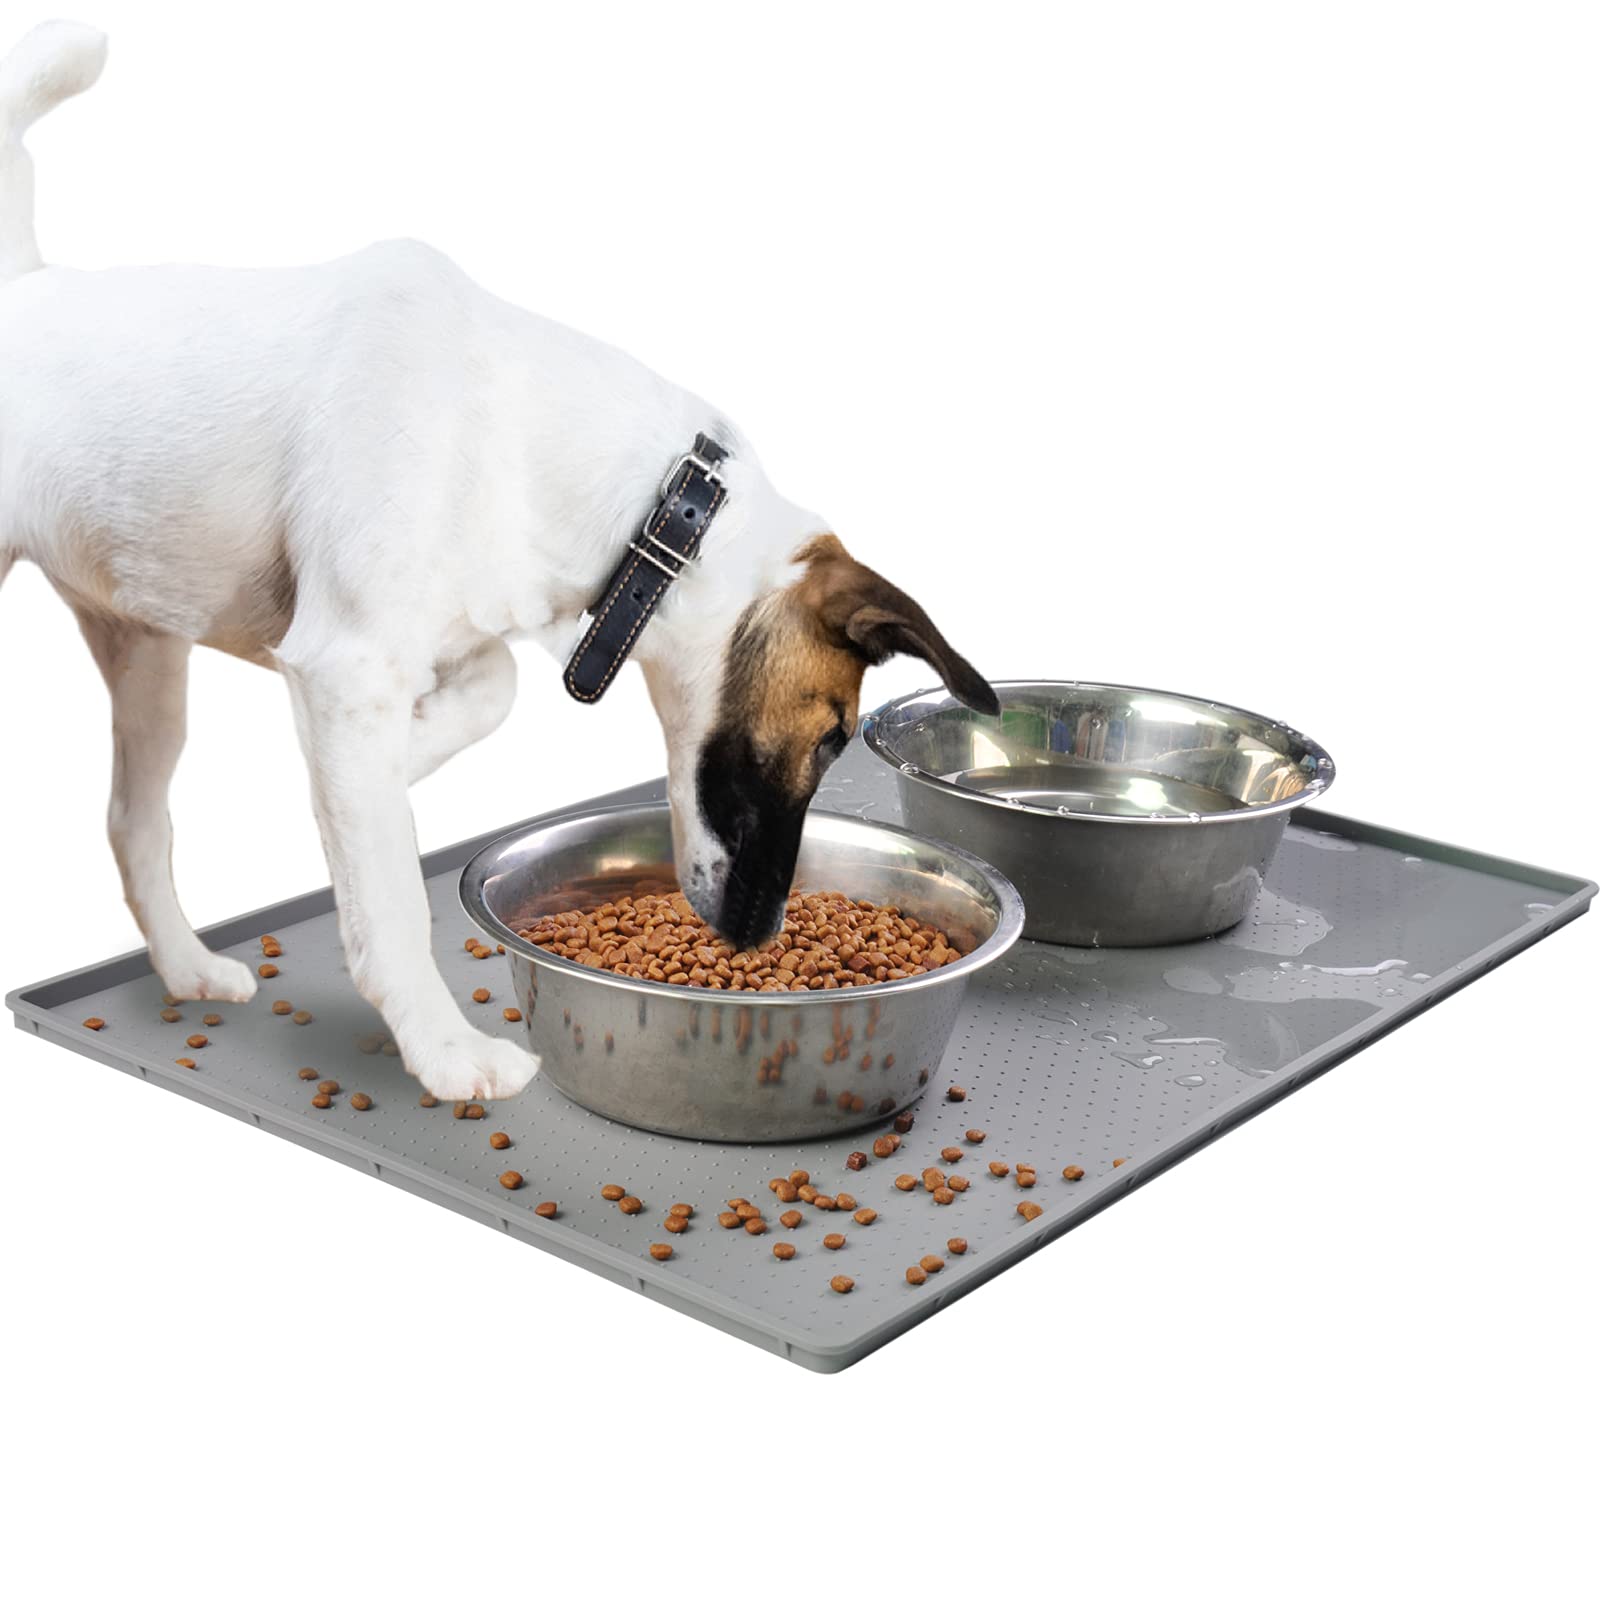 Cat Dog Food Mat For Pet Feeding Bowl Floors Waterproof Non Slip Silicone